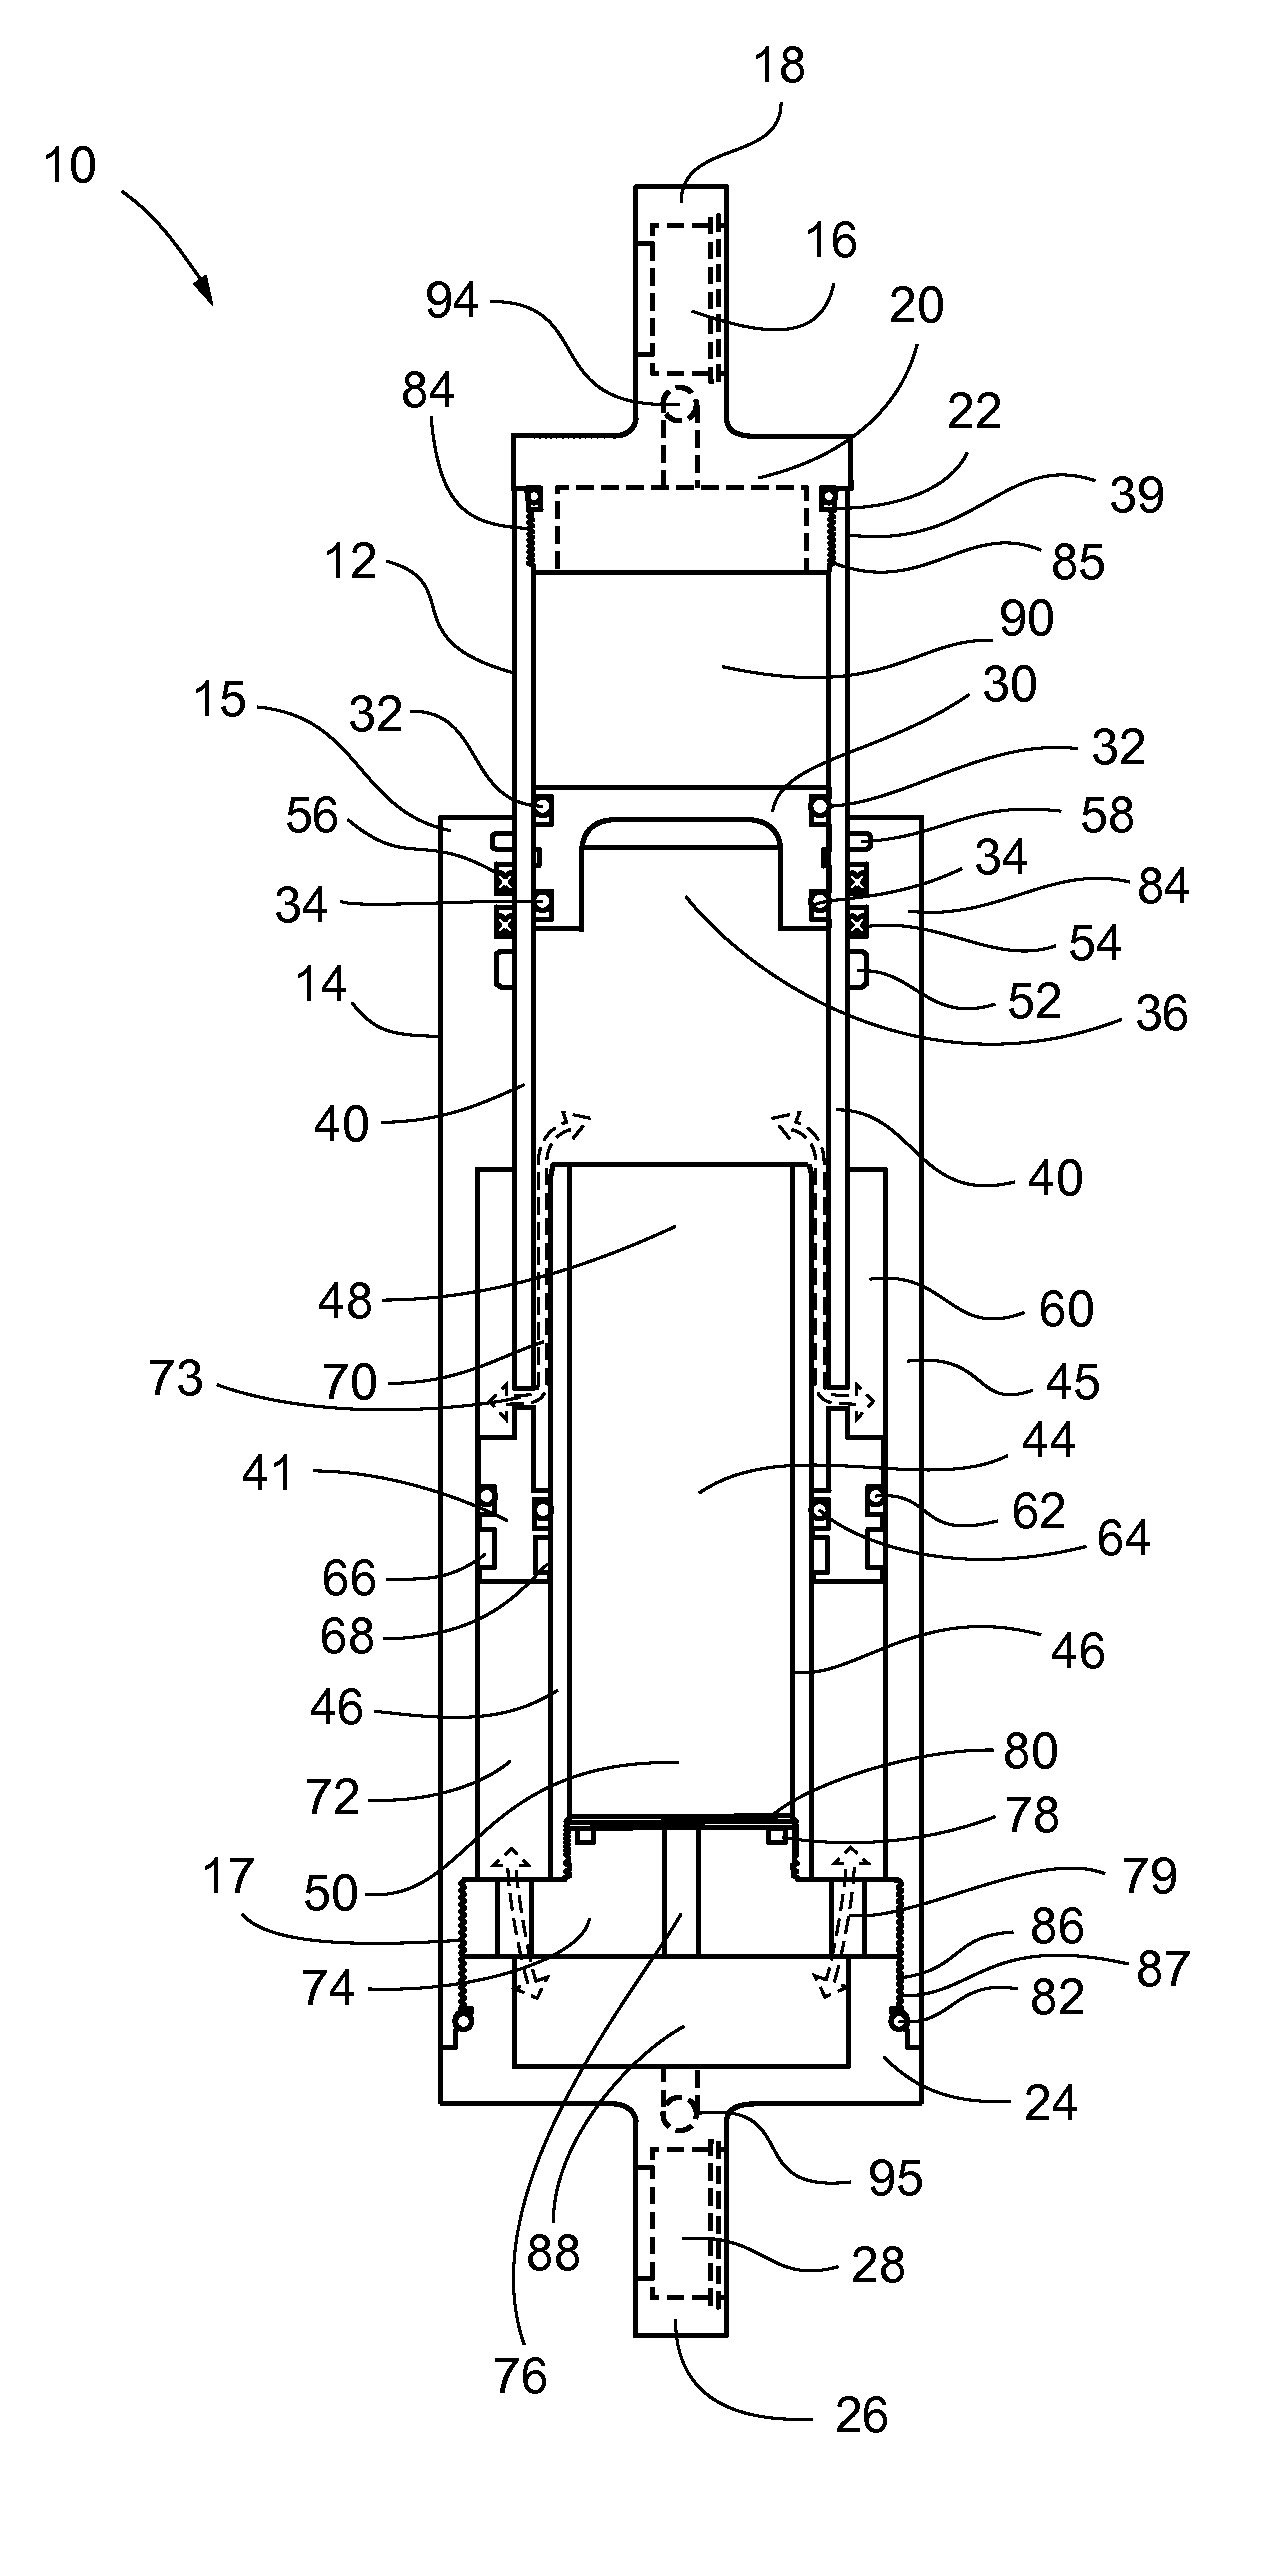 Springless combination shock absorber and suspension apparatus, and method of use